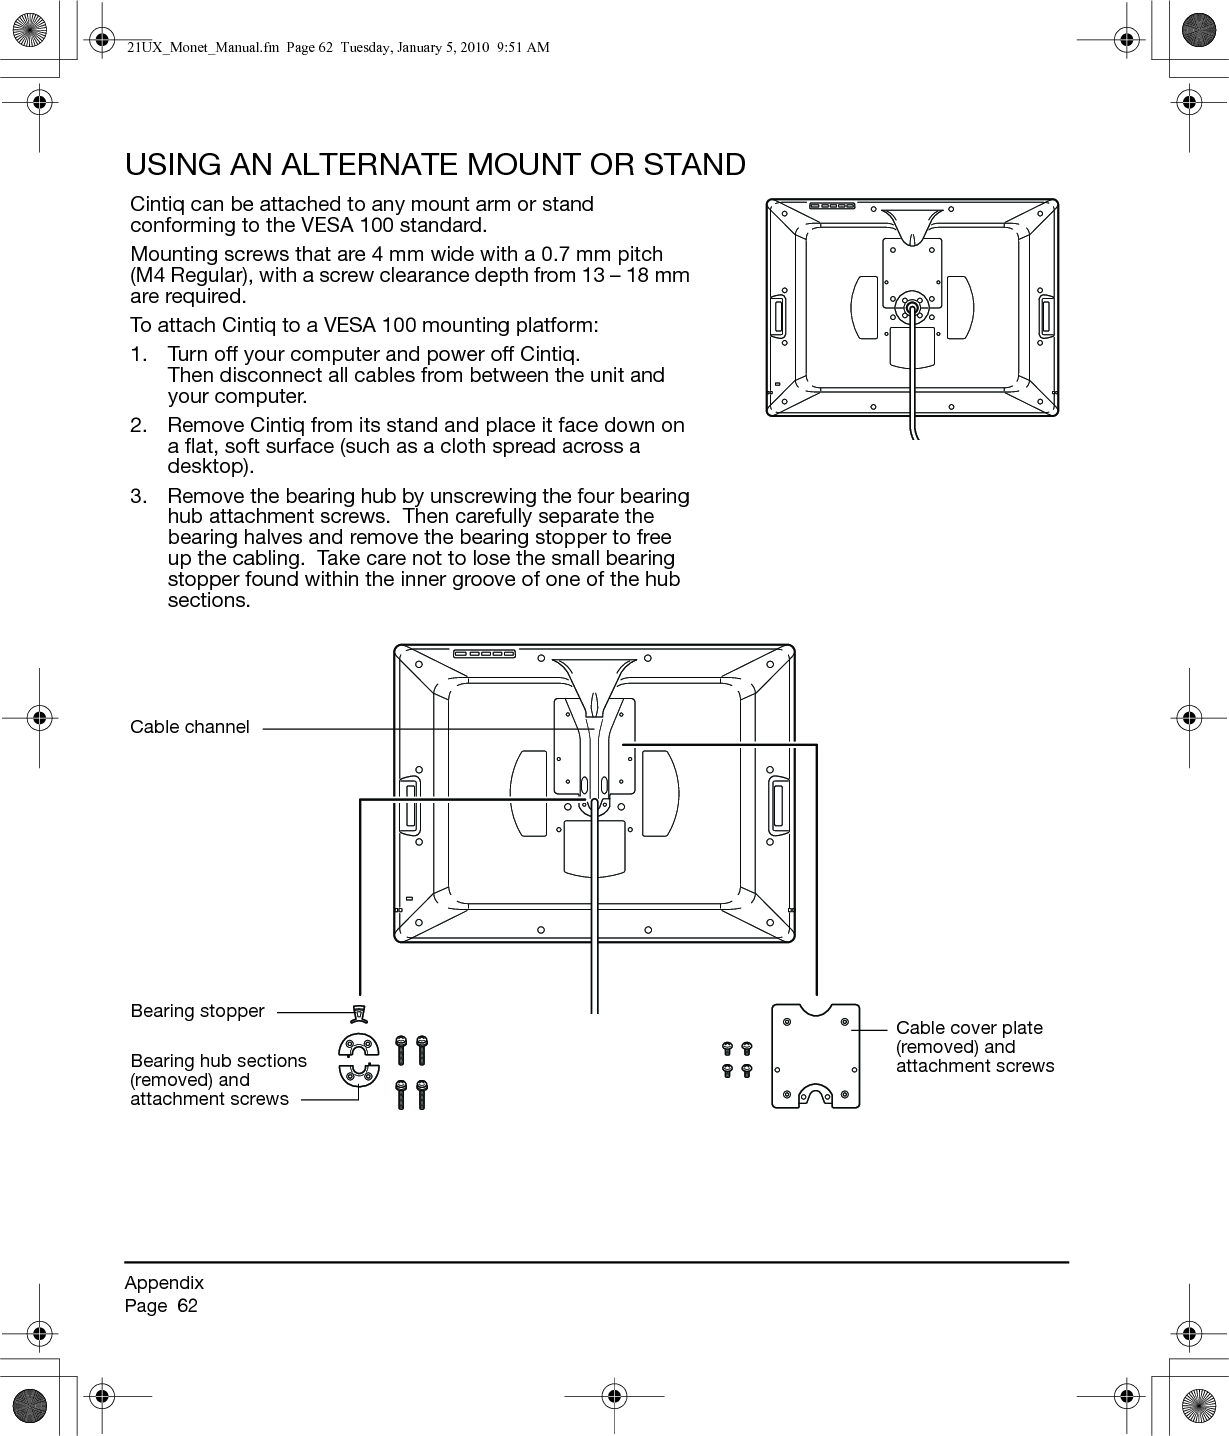 AppendixPage  62USING AN ALTERNATE MOUNT OR STANDCintiq can be attached to any mount arm or stand conforming to the VESA 100 standard.Mounting screws that are 4 mm wide with a 0.7 mm pitch (M4 Regular), with a screw clearance depth from 13 – 18 mm are required.To attach Cintiq to a VESA 100 mounting platform:1. Turn off your computer and power off Cintiq.  Then disconnect all cables from between the unit and your computer.2. Remove Cintiq from its stand and place it face down on a flat, soft surface (such as a cloth spread across a desktop).3. Remove the bearing hub by unscrewing the four bearing hub attachment screws.  Then carefully separate the bearing halves and remove the bearing stopper to free up the cabling.  Take care not to lose the small bearing stopper found within the inner groove of one of the hub sections.Cable channelCable cover plate (removed) and attachment screwsBearing stopperBearing hub sections (removed) and attachment screws21UX_Monet_Manual.fm  Page 62  Tuesday, January 5, 2010  9:51 AM